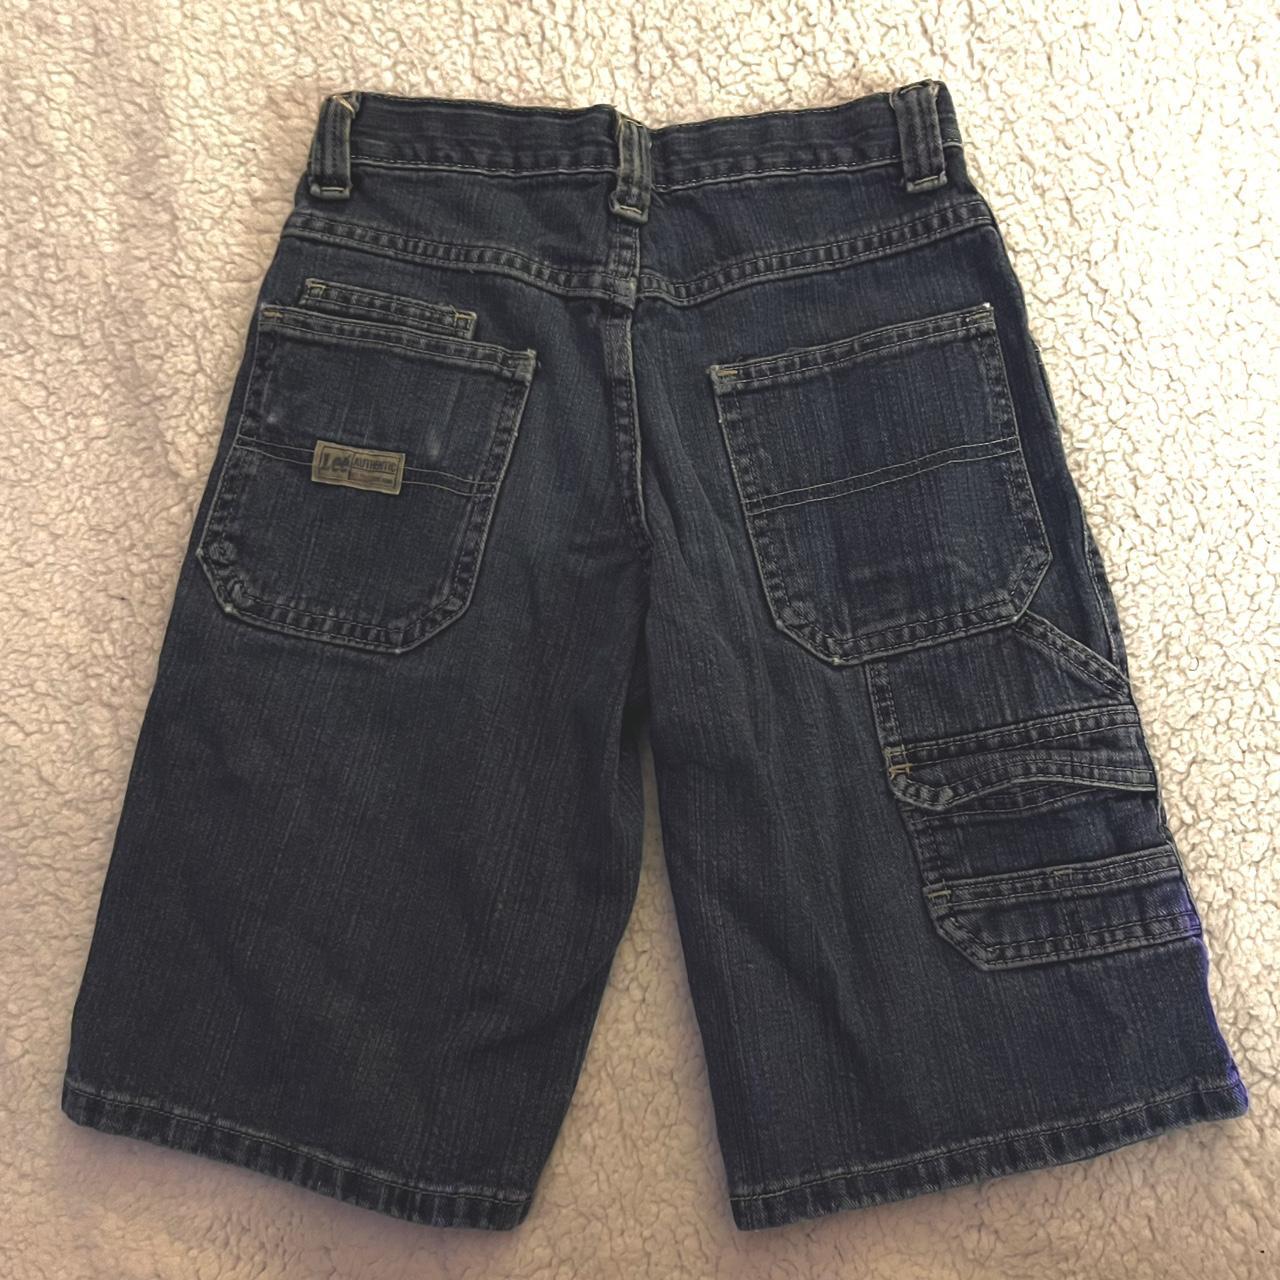 Lee Authentic jorts fits small/xs #LeeAuthentic... - Depop